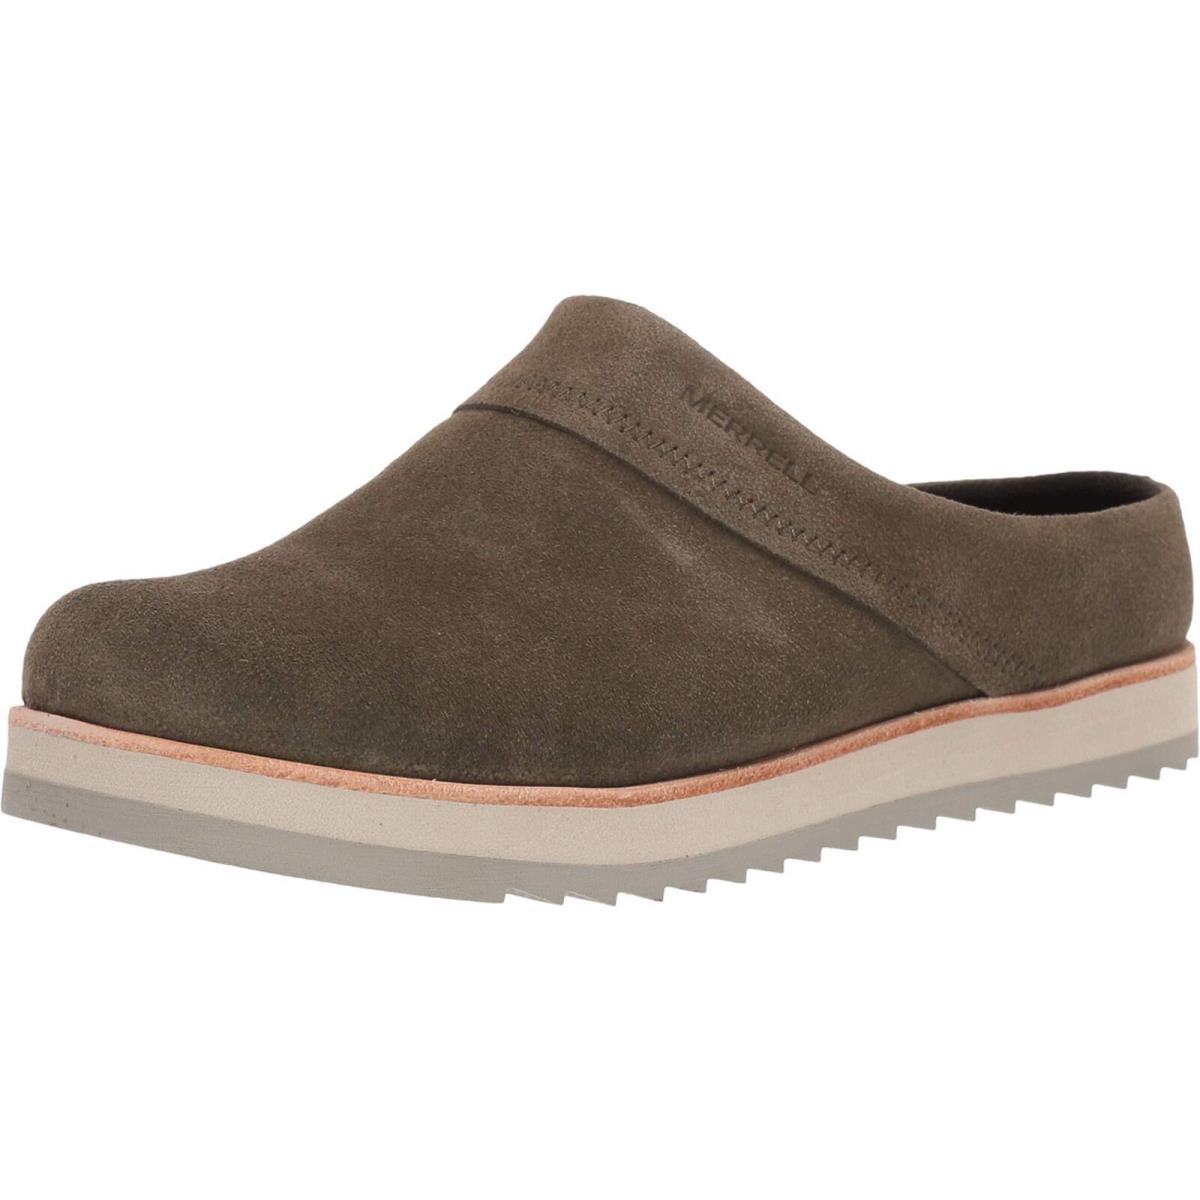 Merrell Women`s Juno Clog Shoes Suede Olive 9 M